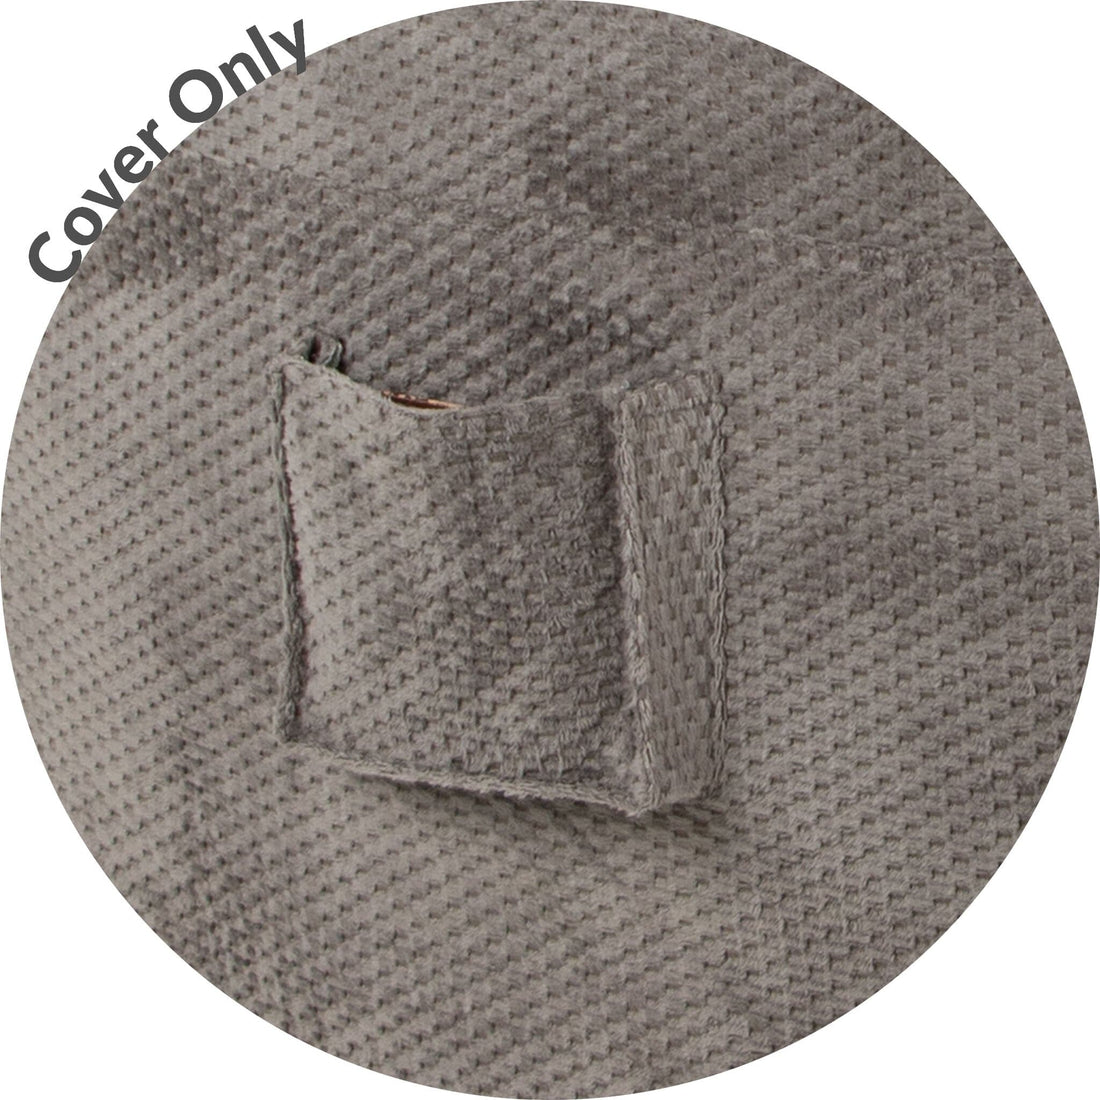 Queen Cover Only - NEST Chenille (Excludes Pillow)